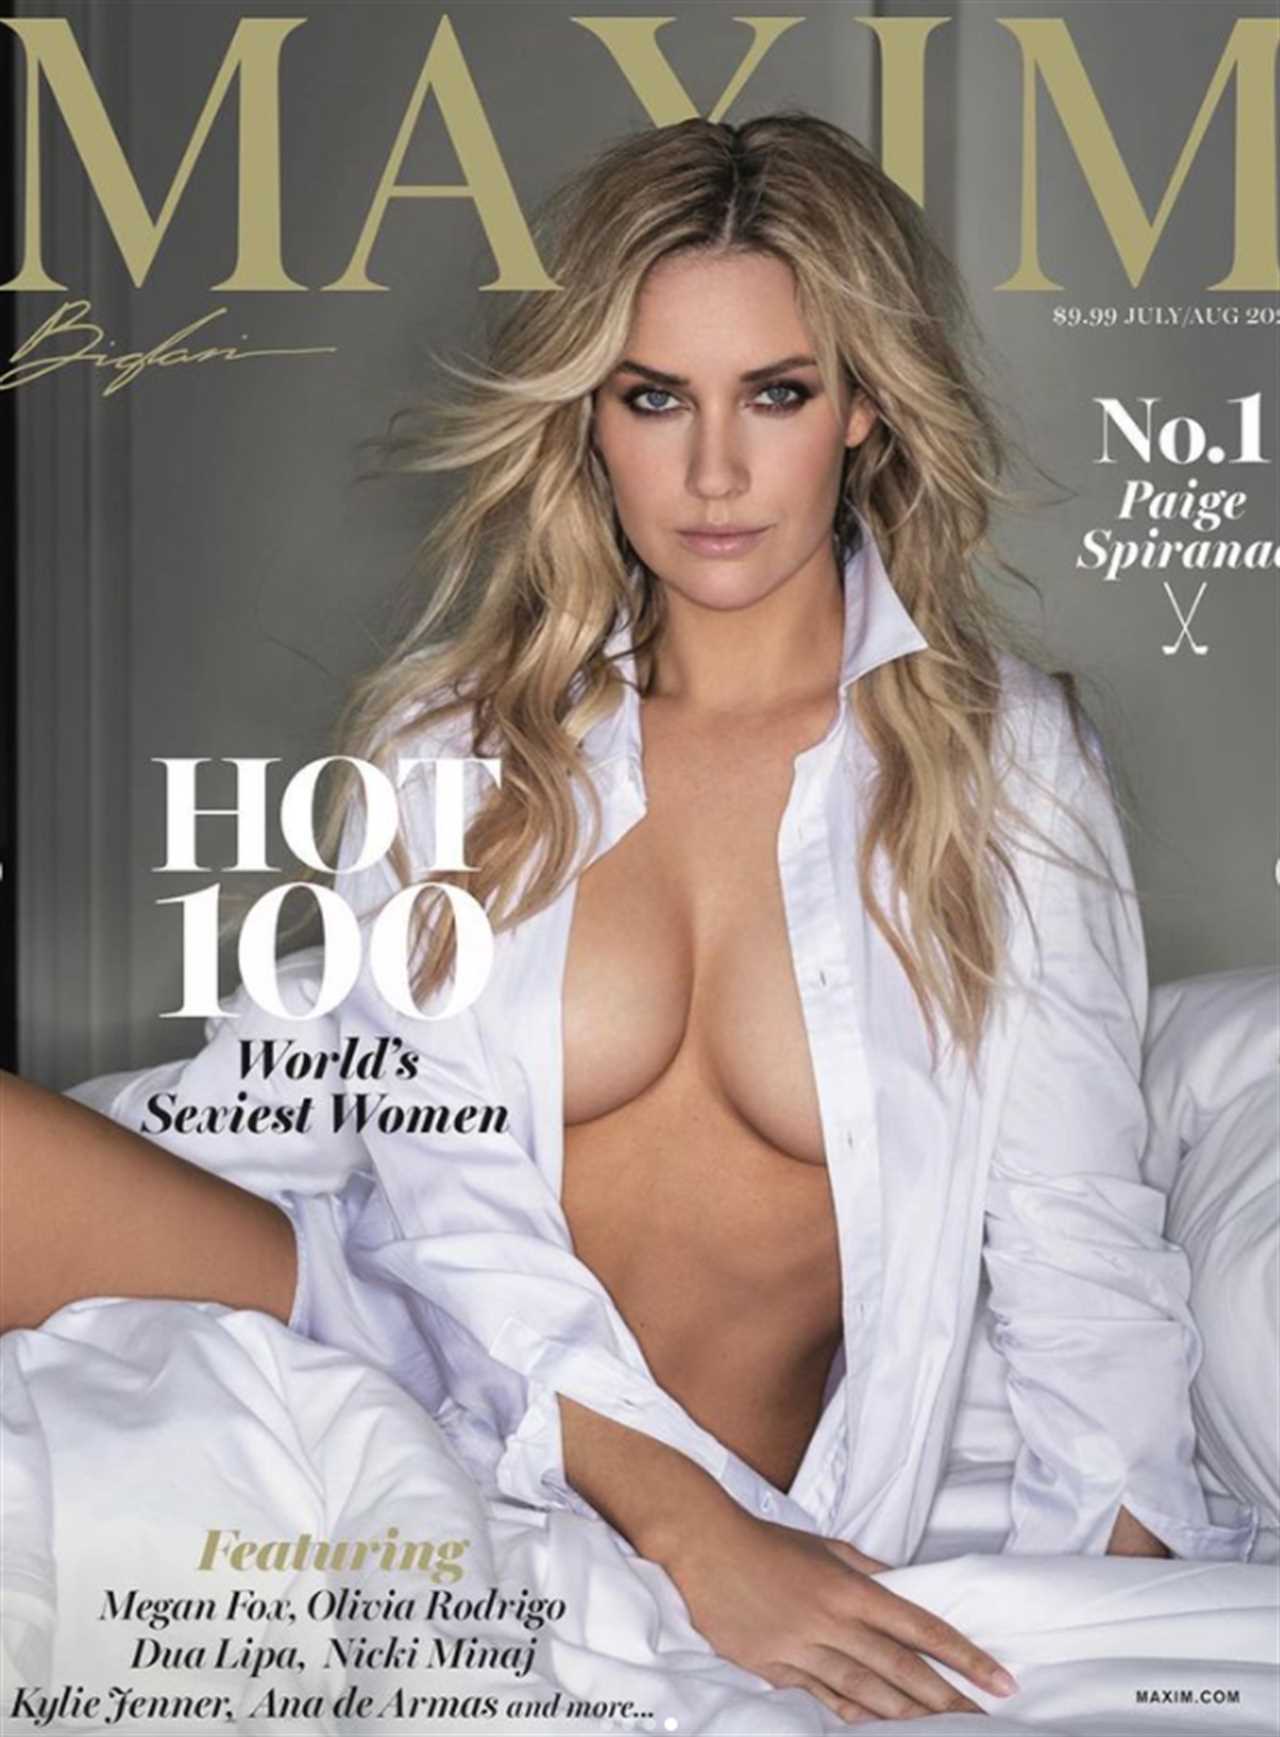 Paige Spiranac was named as the "Sexiest Woman Alive" for 2022 by Maxim magazine